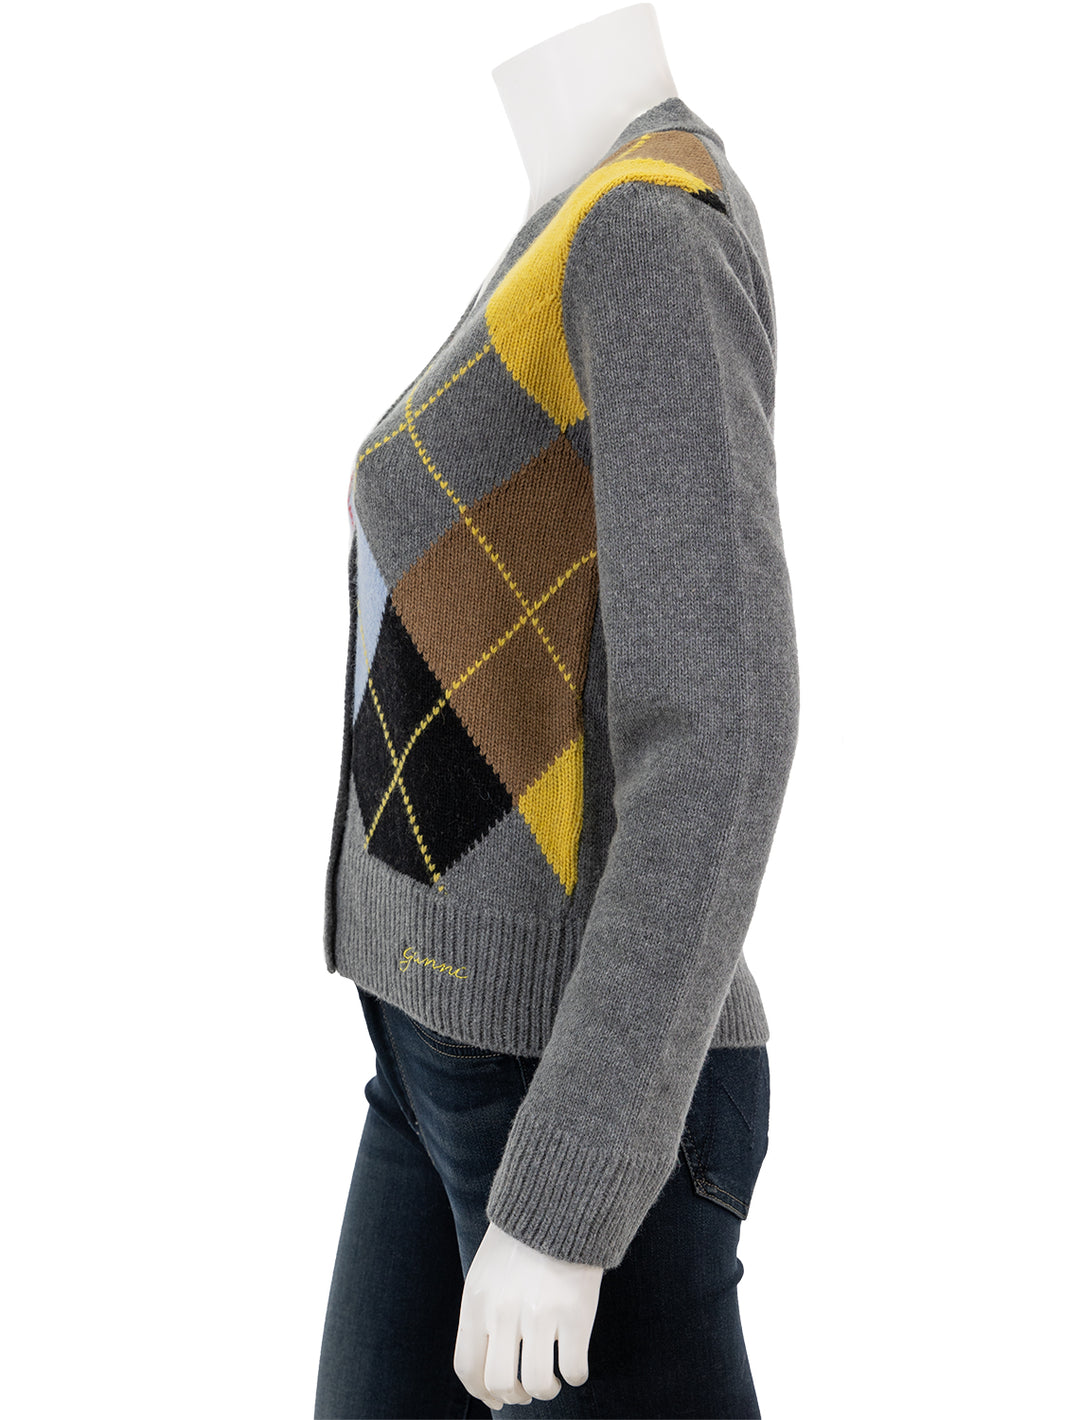 Side view of GANNI's harlequin wool cardigan in frost grey.